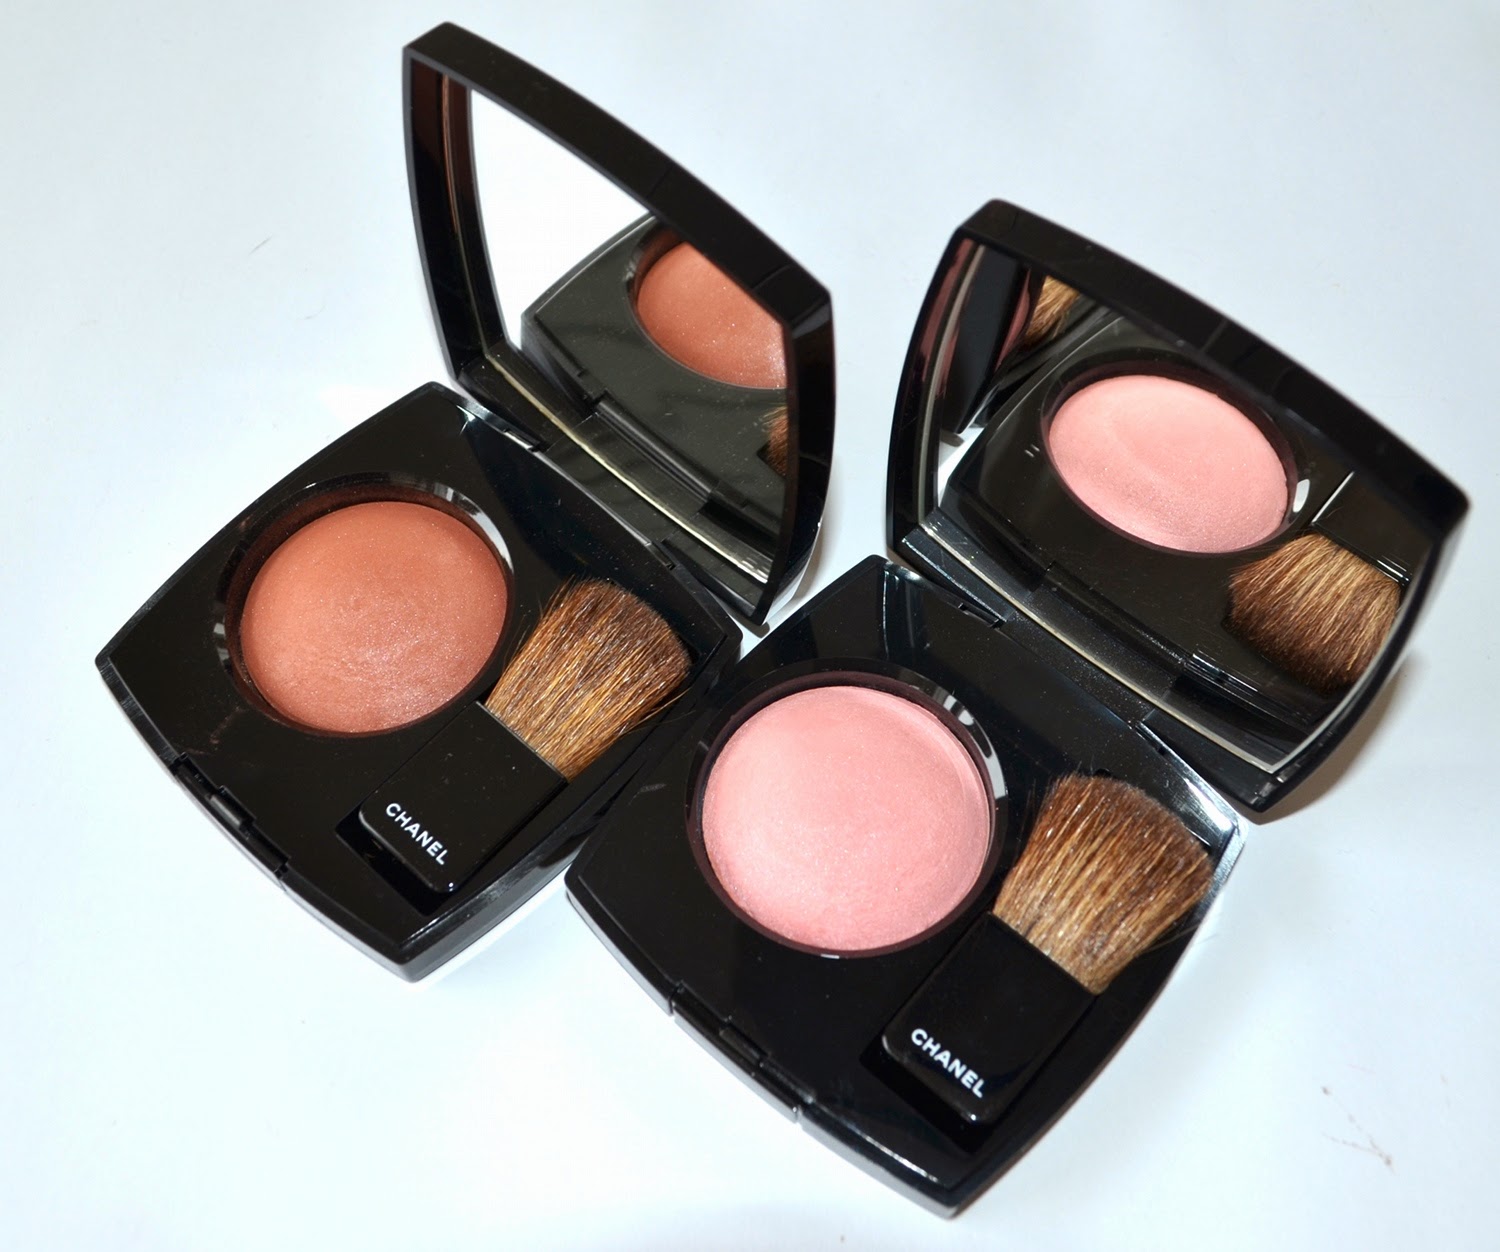 Joues Contraste in #85 Evocation & #86 Discretion, Two New Powder Blush  from Chanel